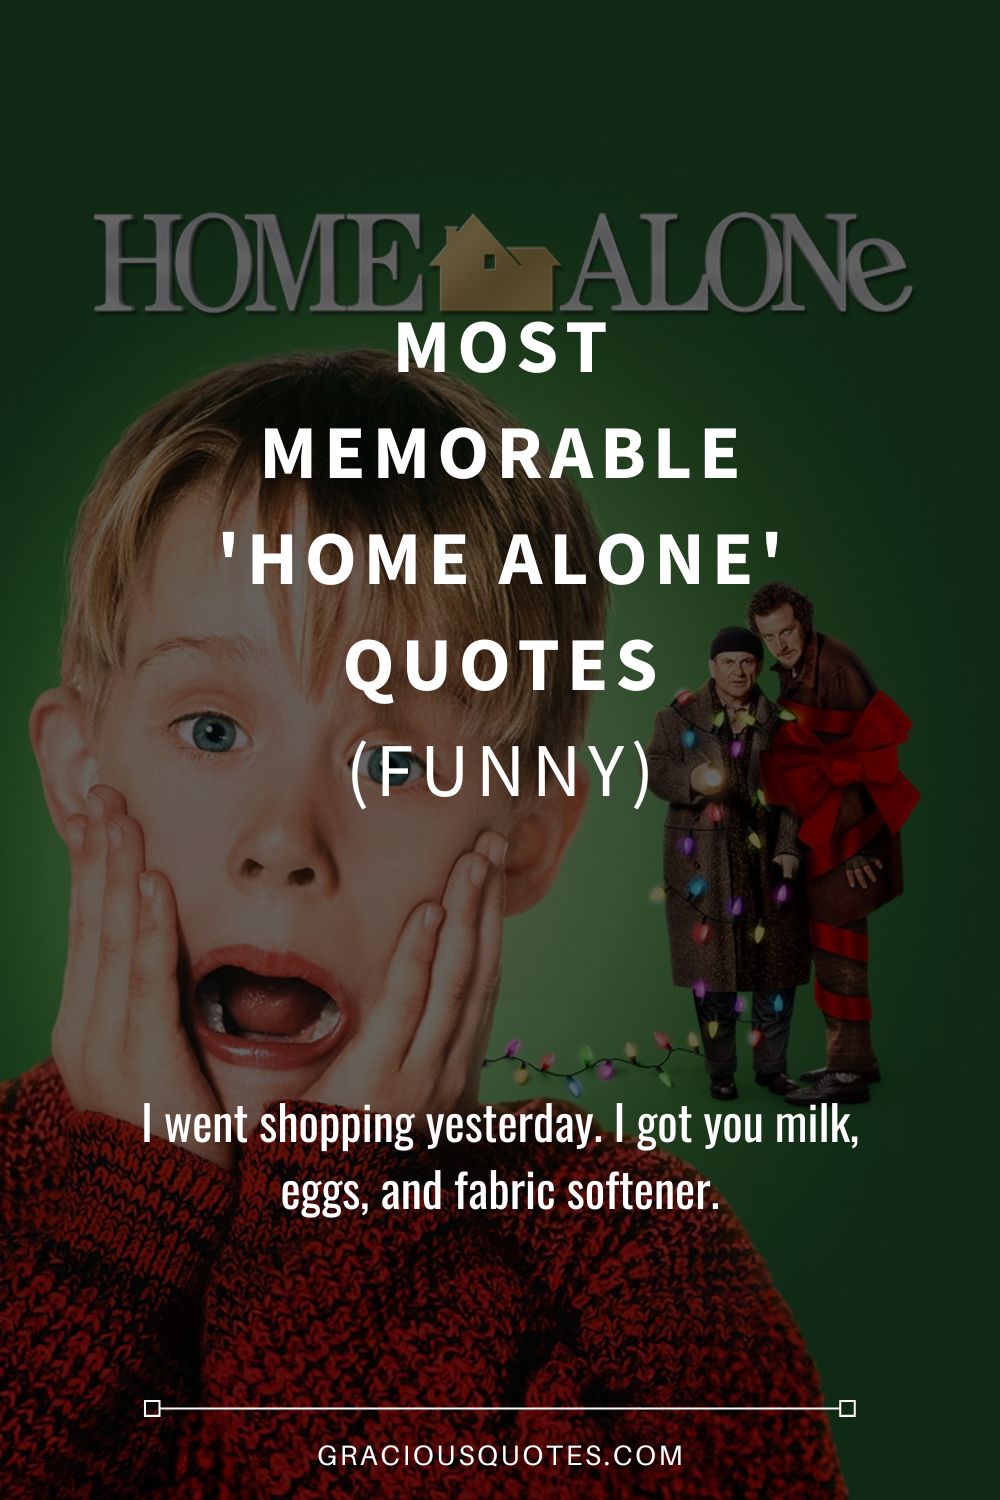 100 Most Memorable 'Home Alone' Quotes (FUNNY)